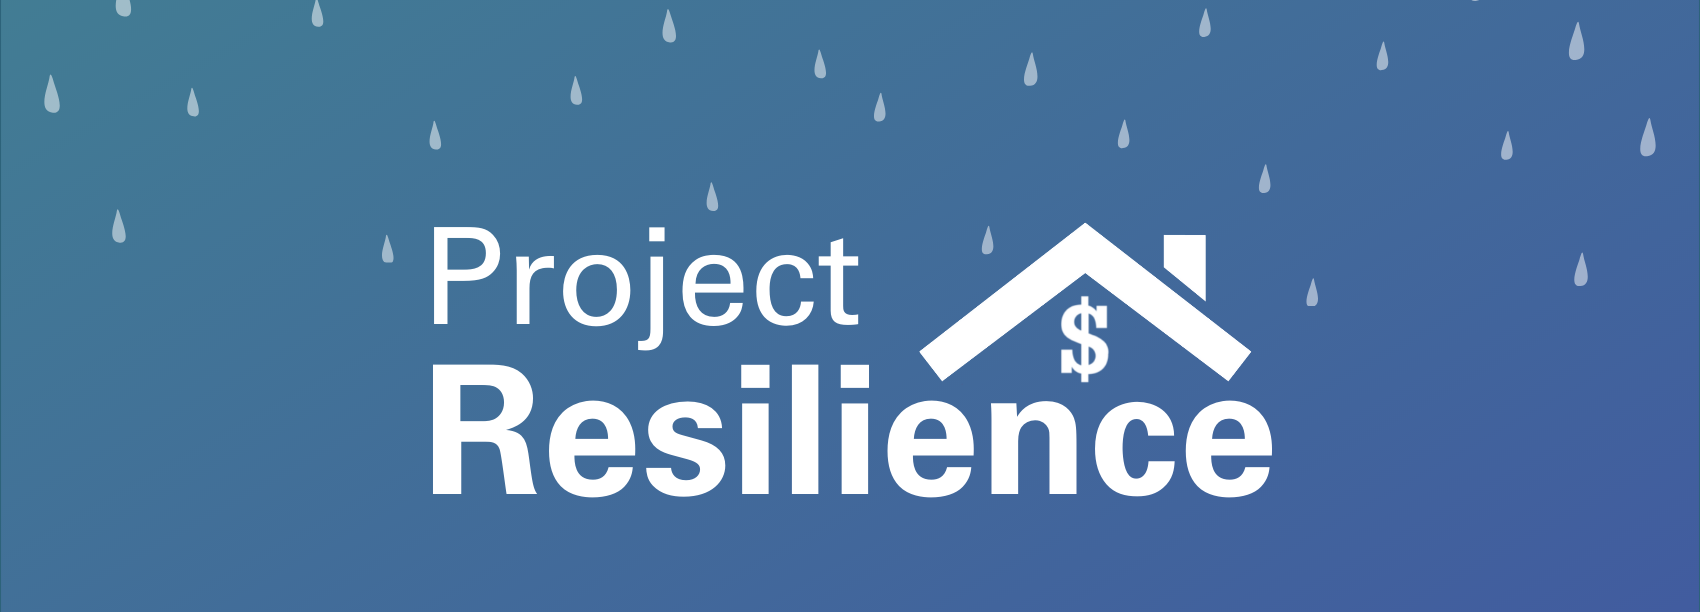 Project Resilience graphic logo